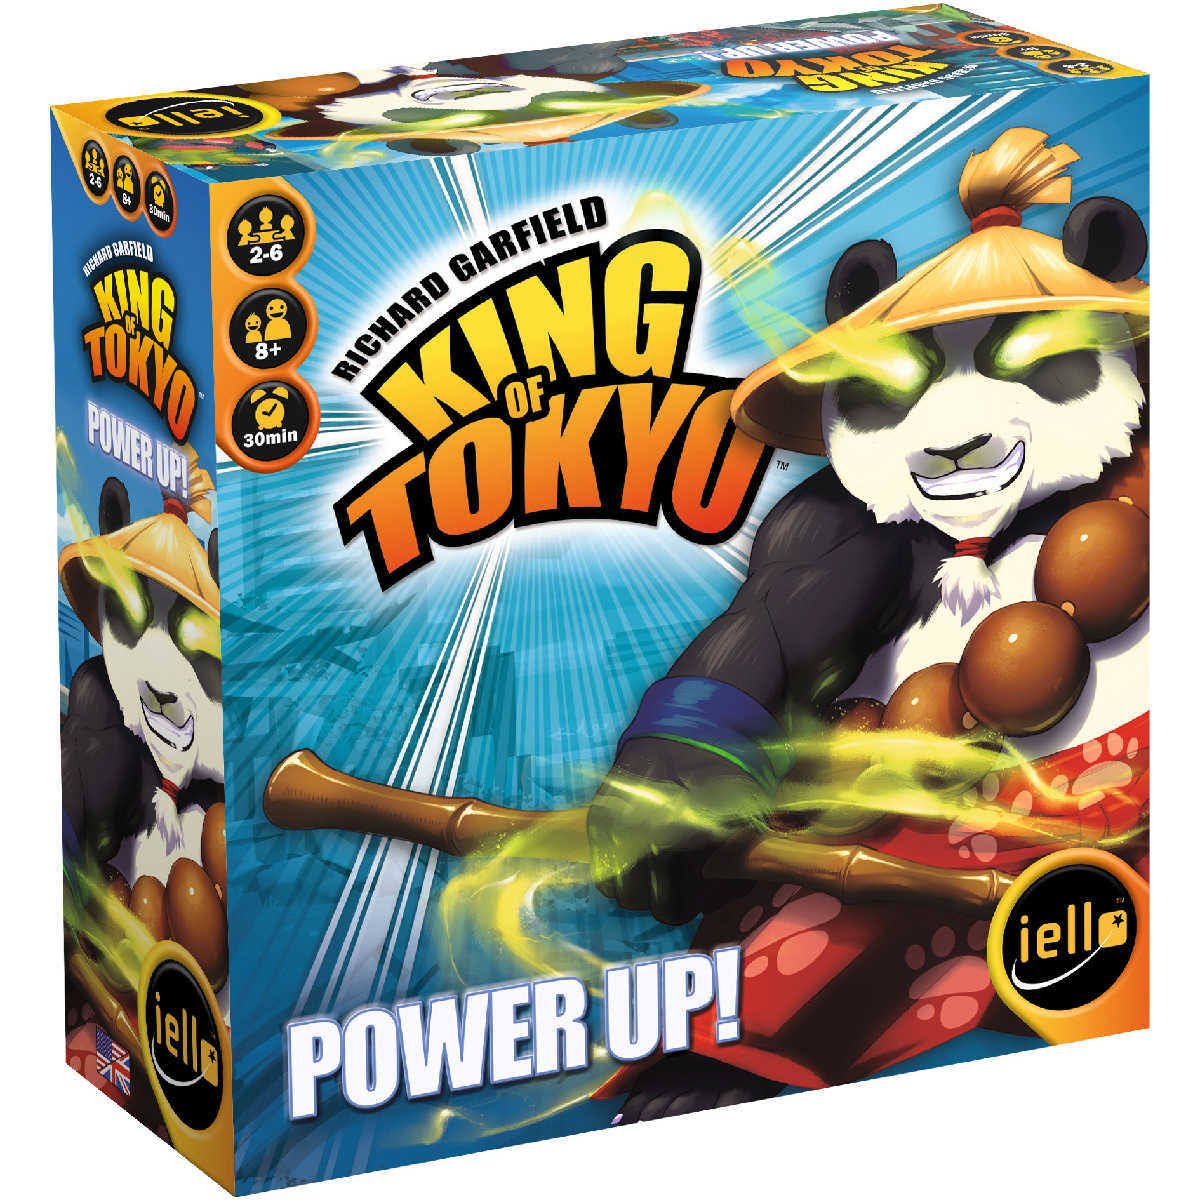 Iello King Of Tokyo Power Up